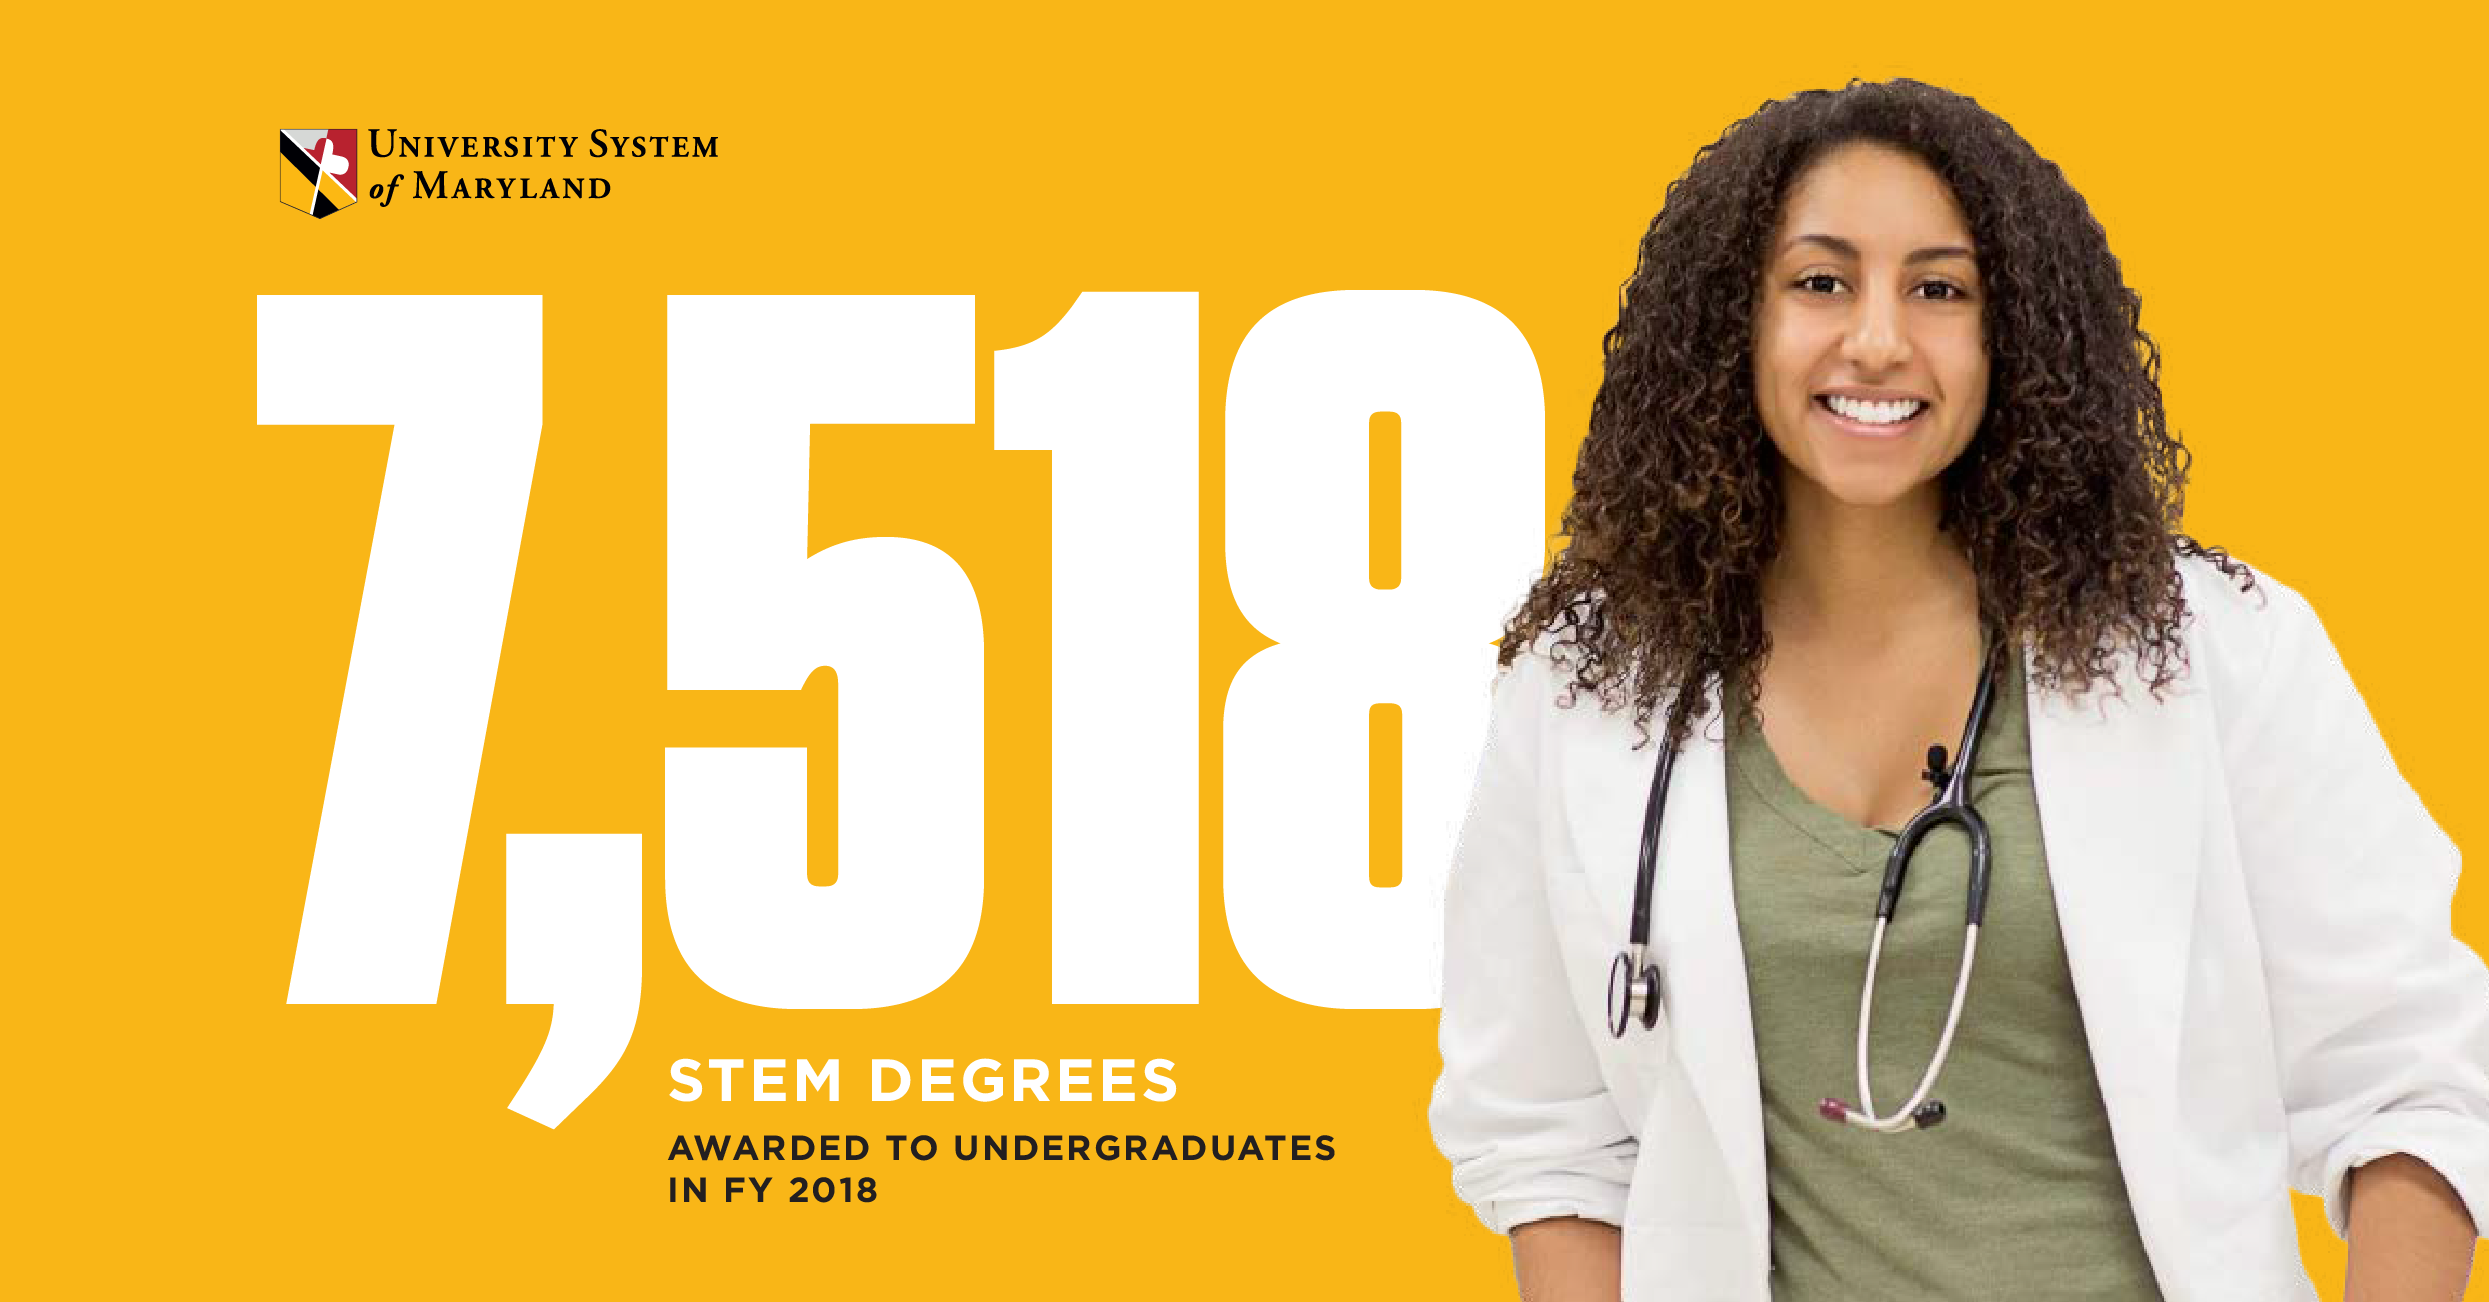 7,518 STEM Degrees Awarded to Undegraduates in FY 2018